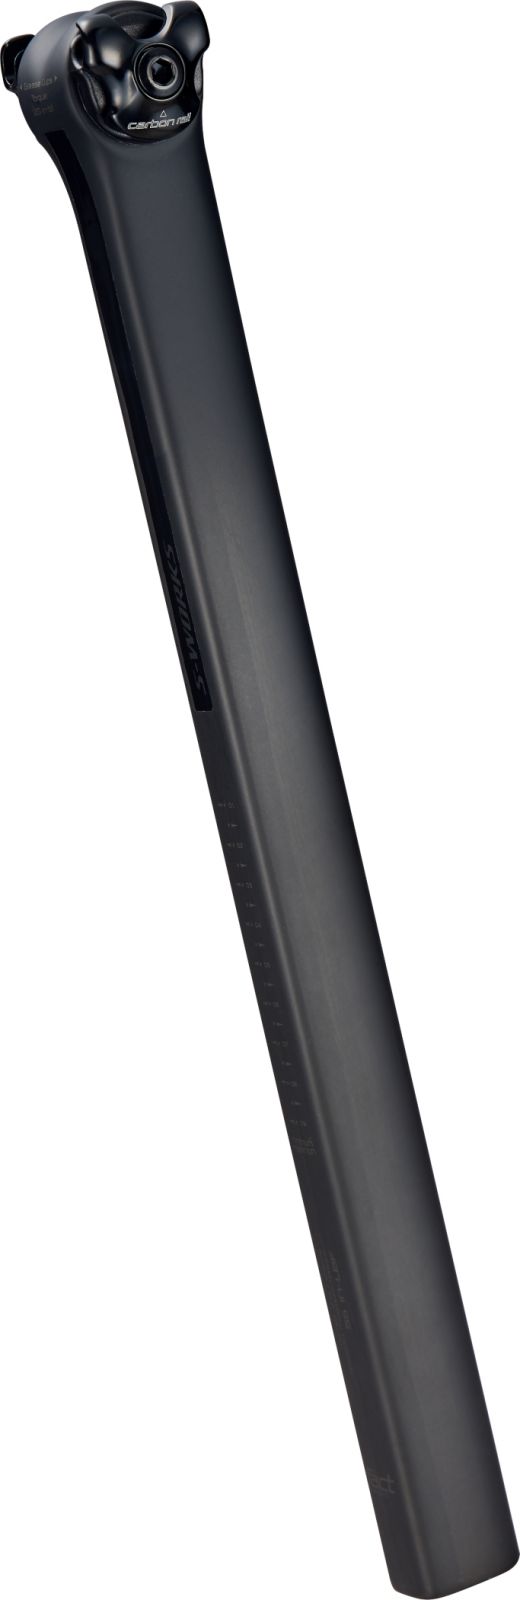 sedlovka Specialized SW PAVE CARBON POST 380MM X 20MM OFFSET